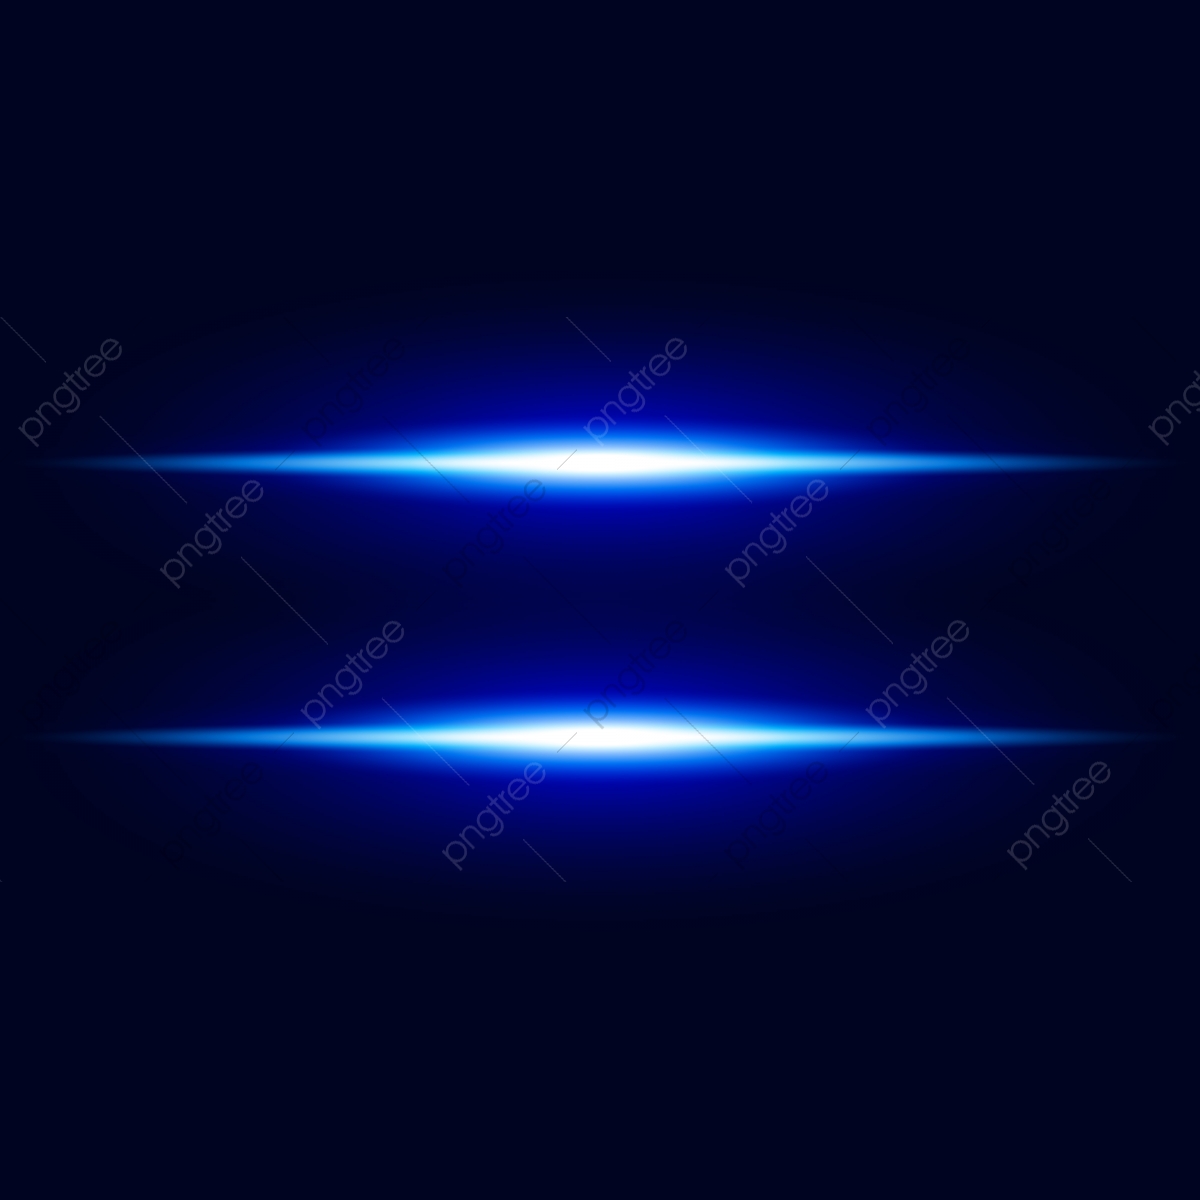 Abstract Blue Light Effect With Shine Bright Vector Background.